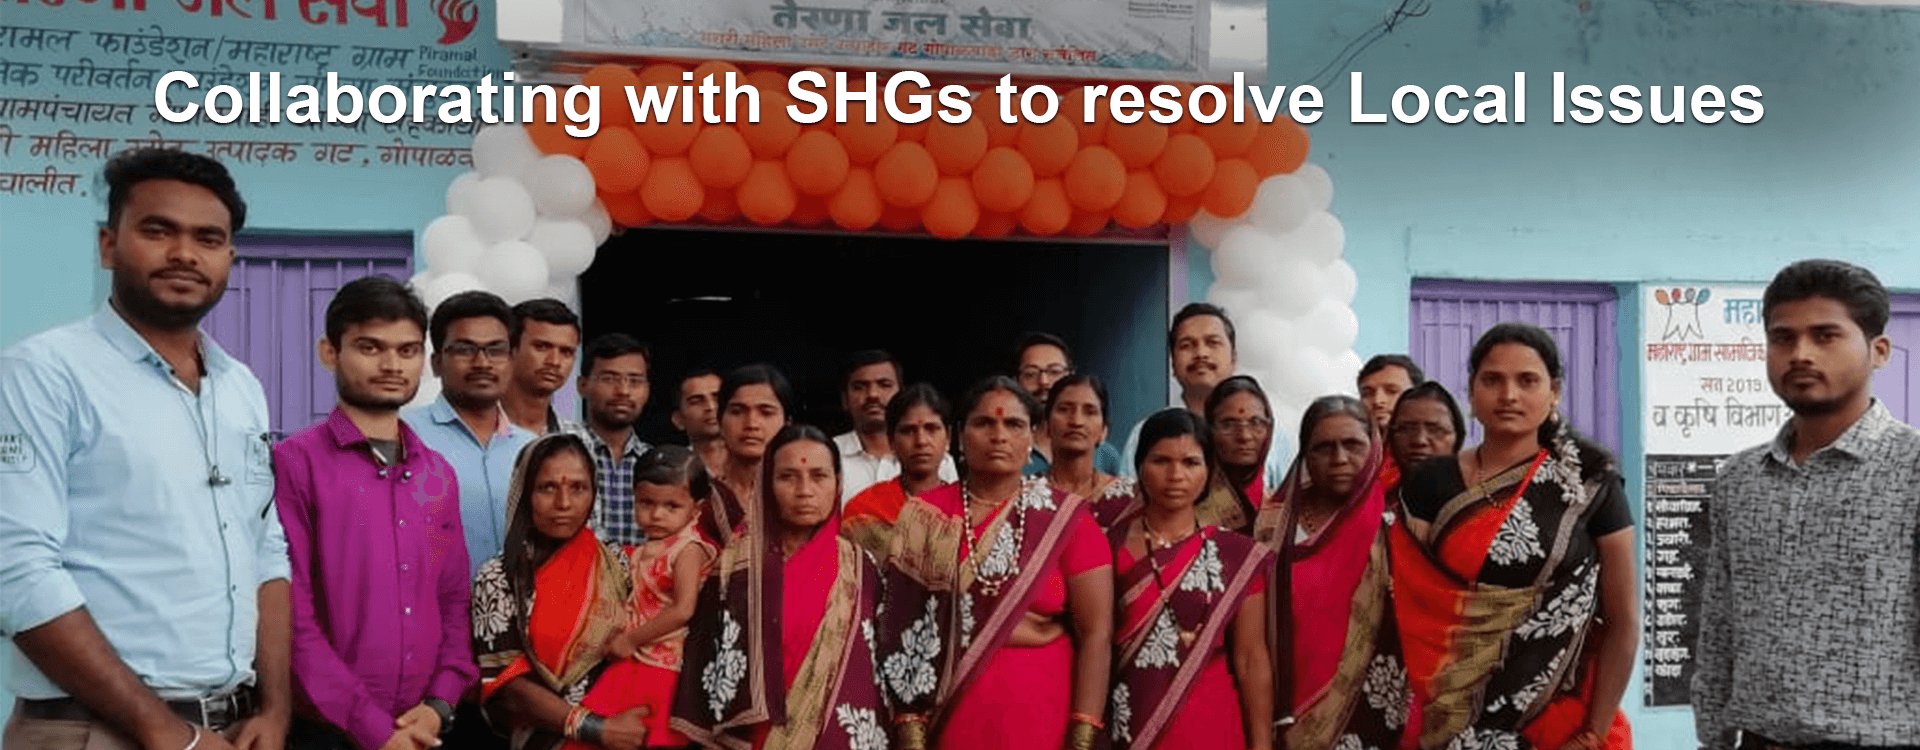 collaborating-with-shg